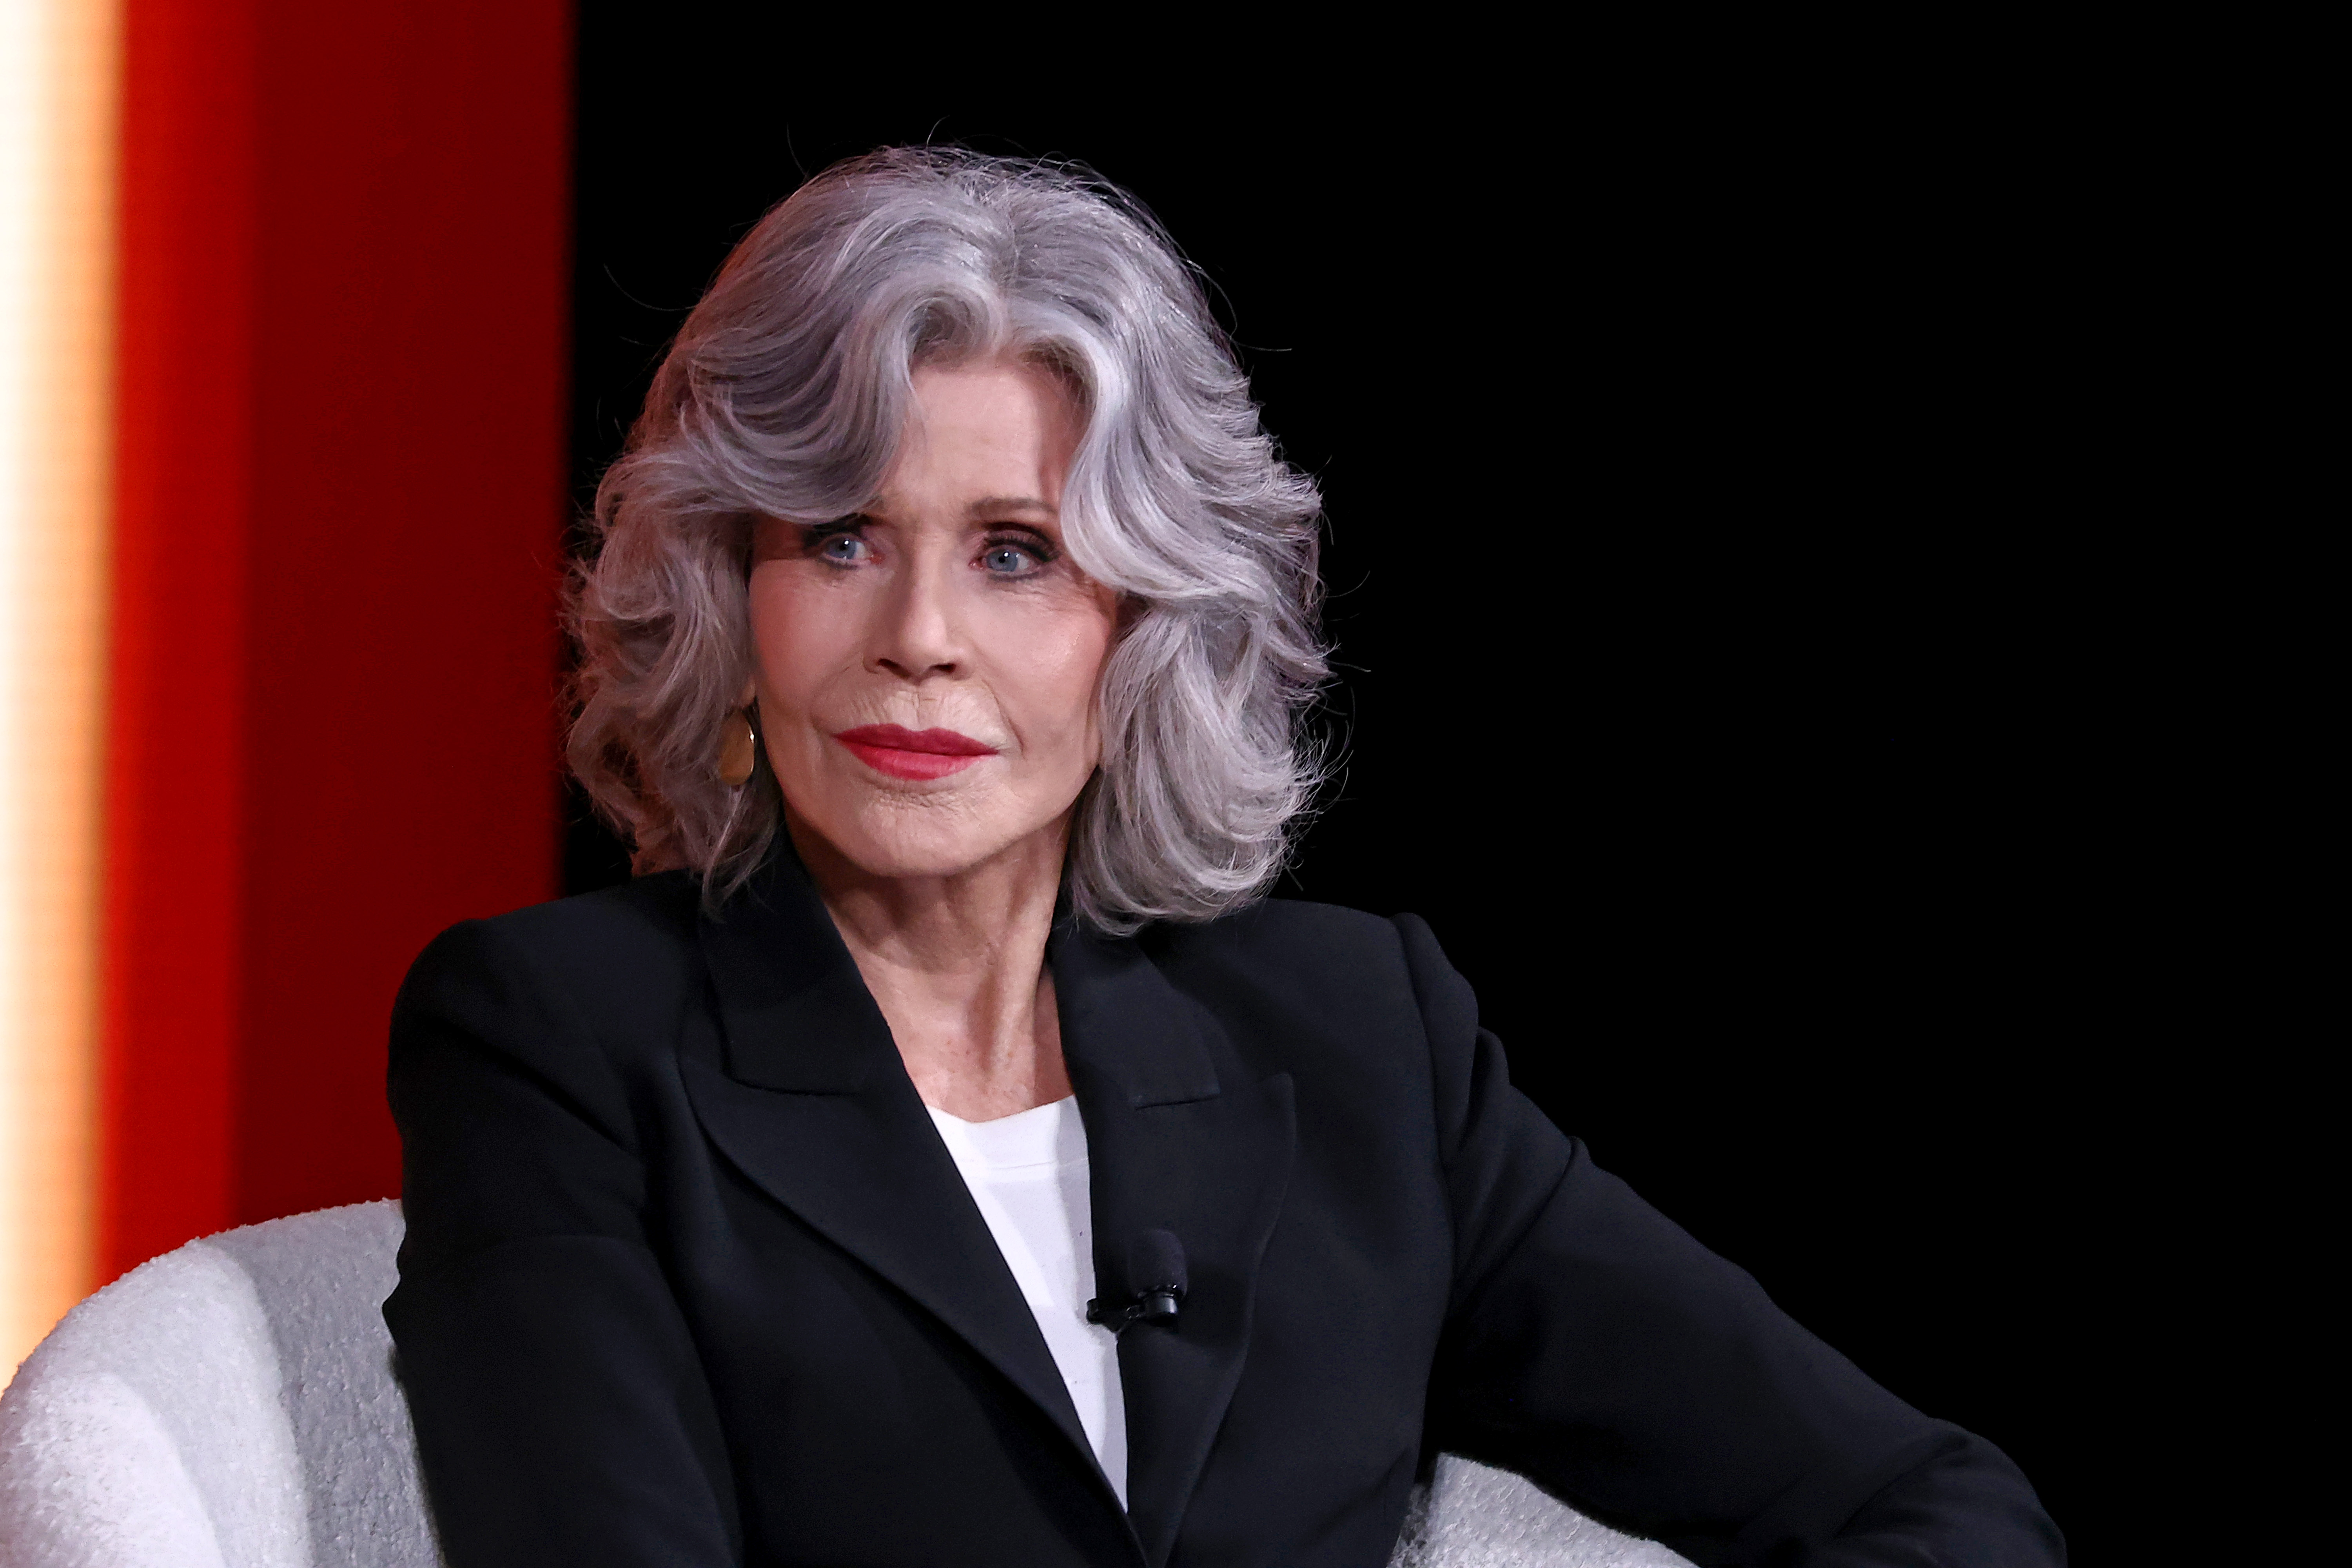 Jane Fonda Wants Americans To ‘Vote For Climate Champions’